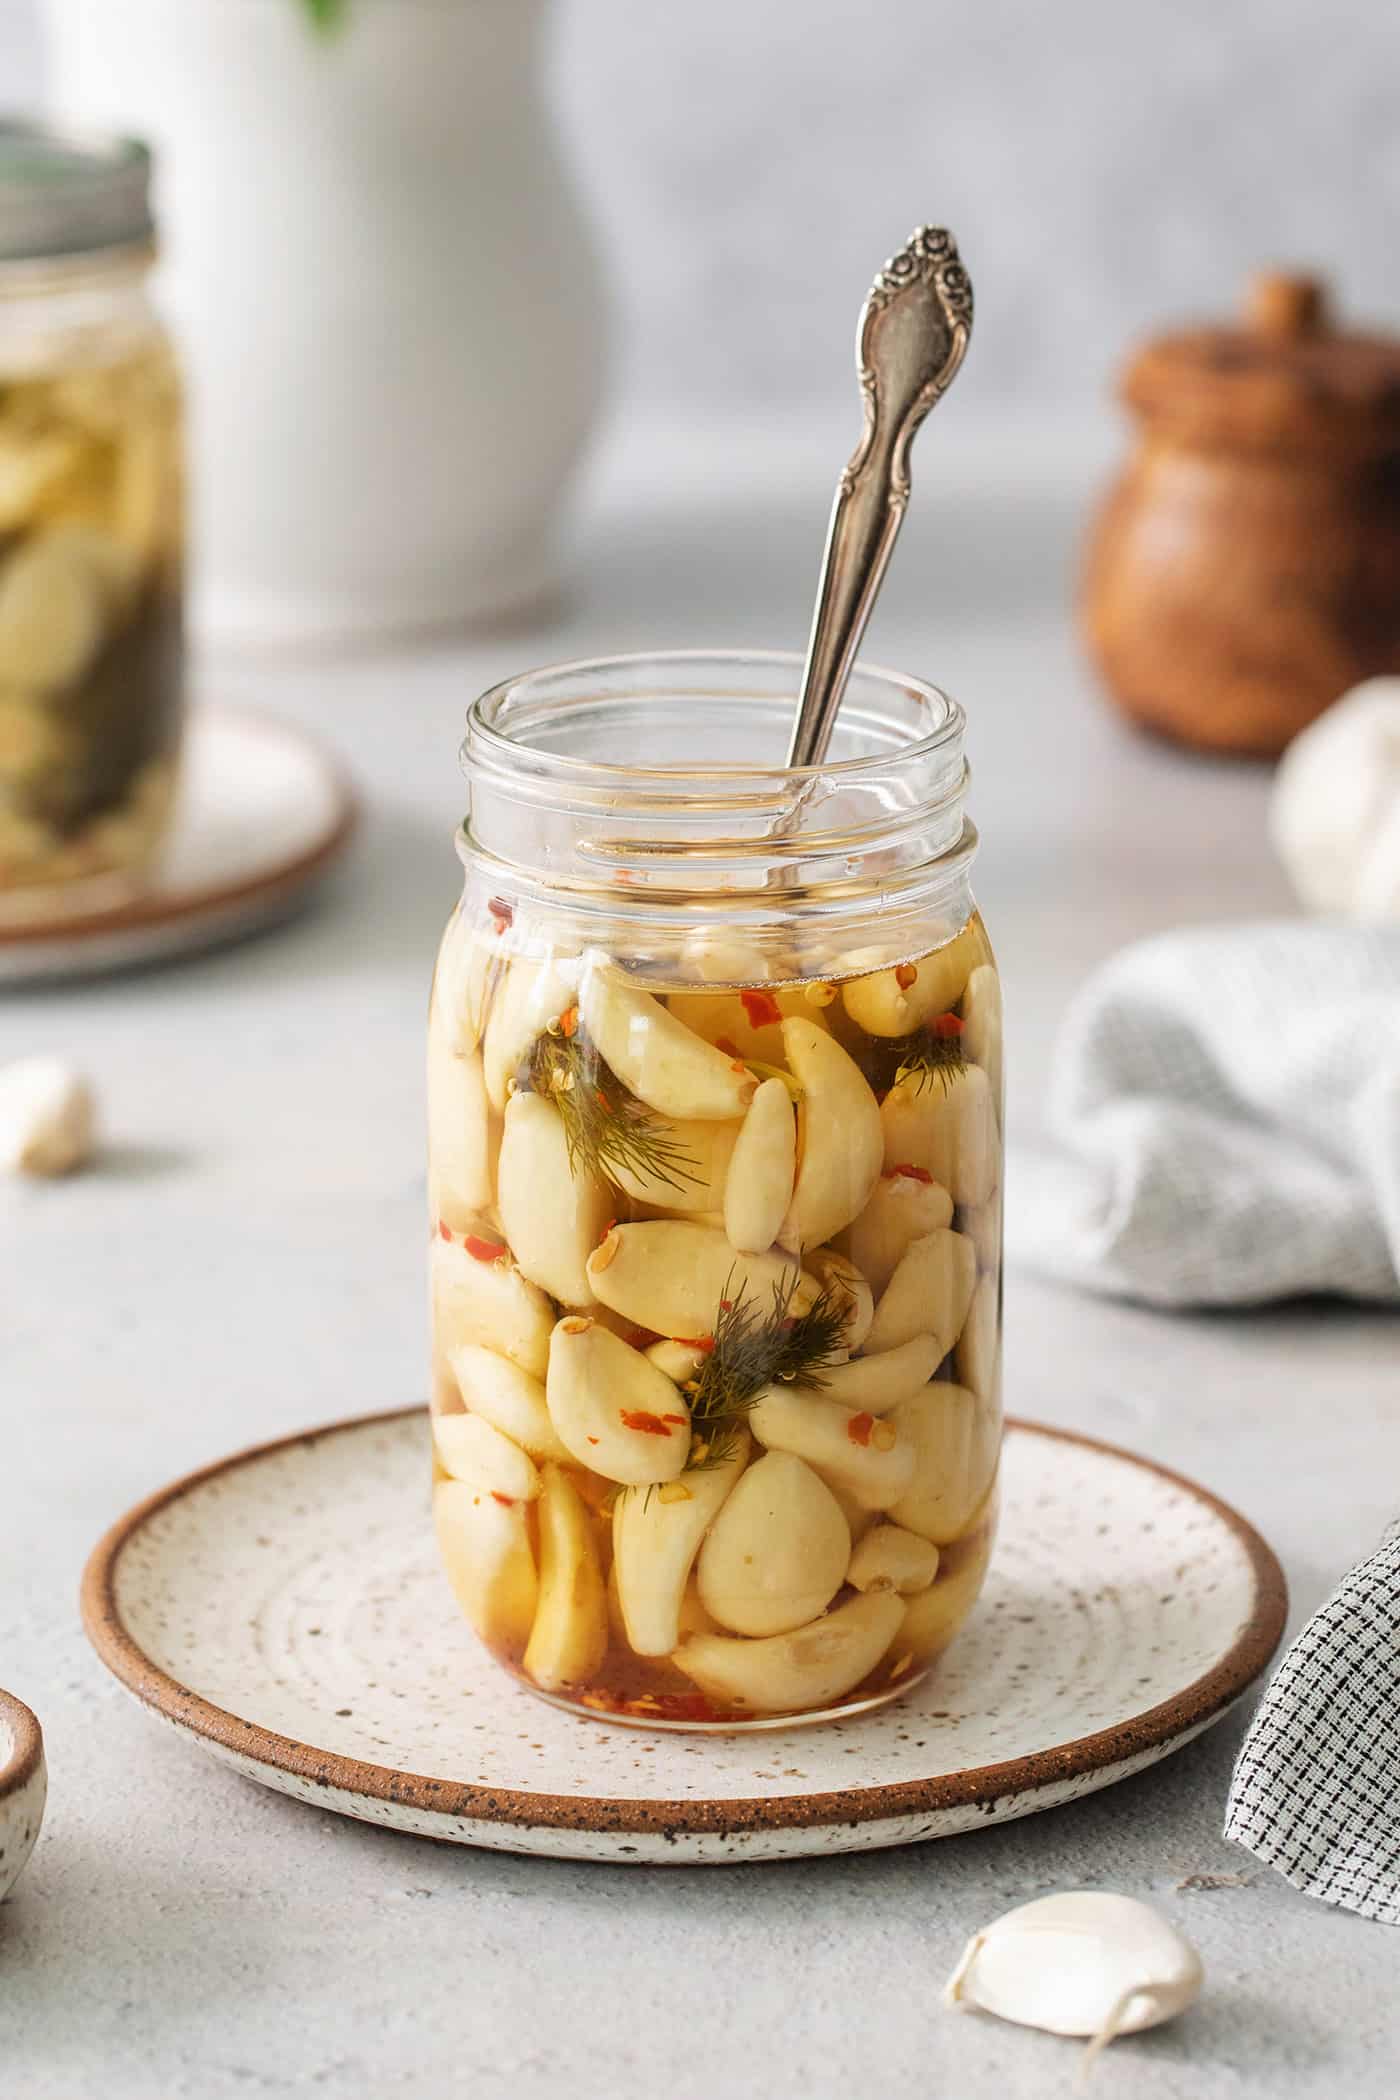 A spoon in a jar of pickled garlic cloves